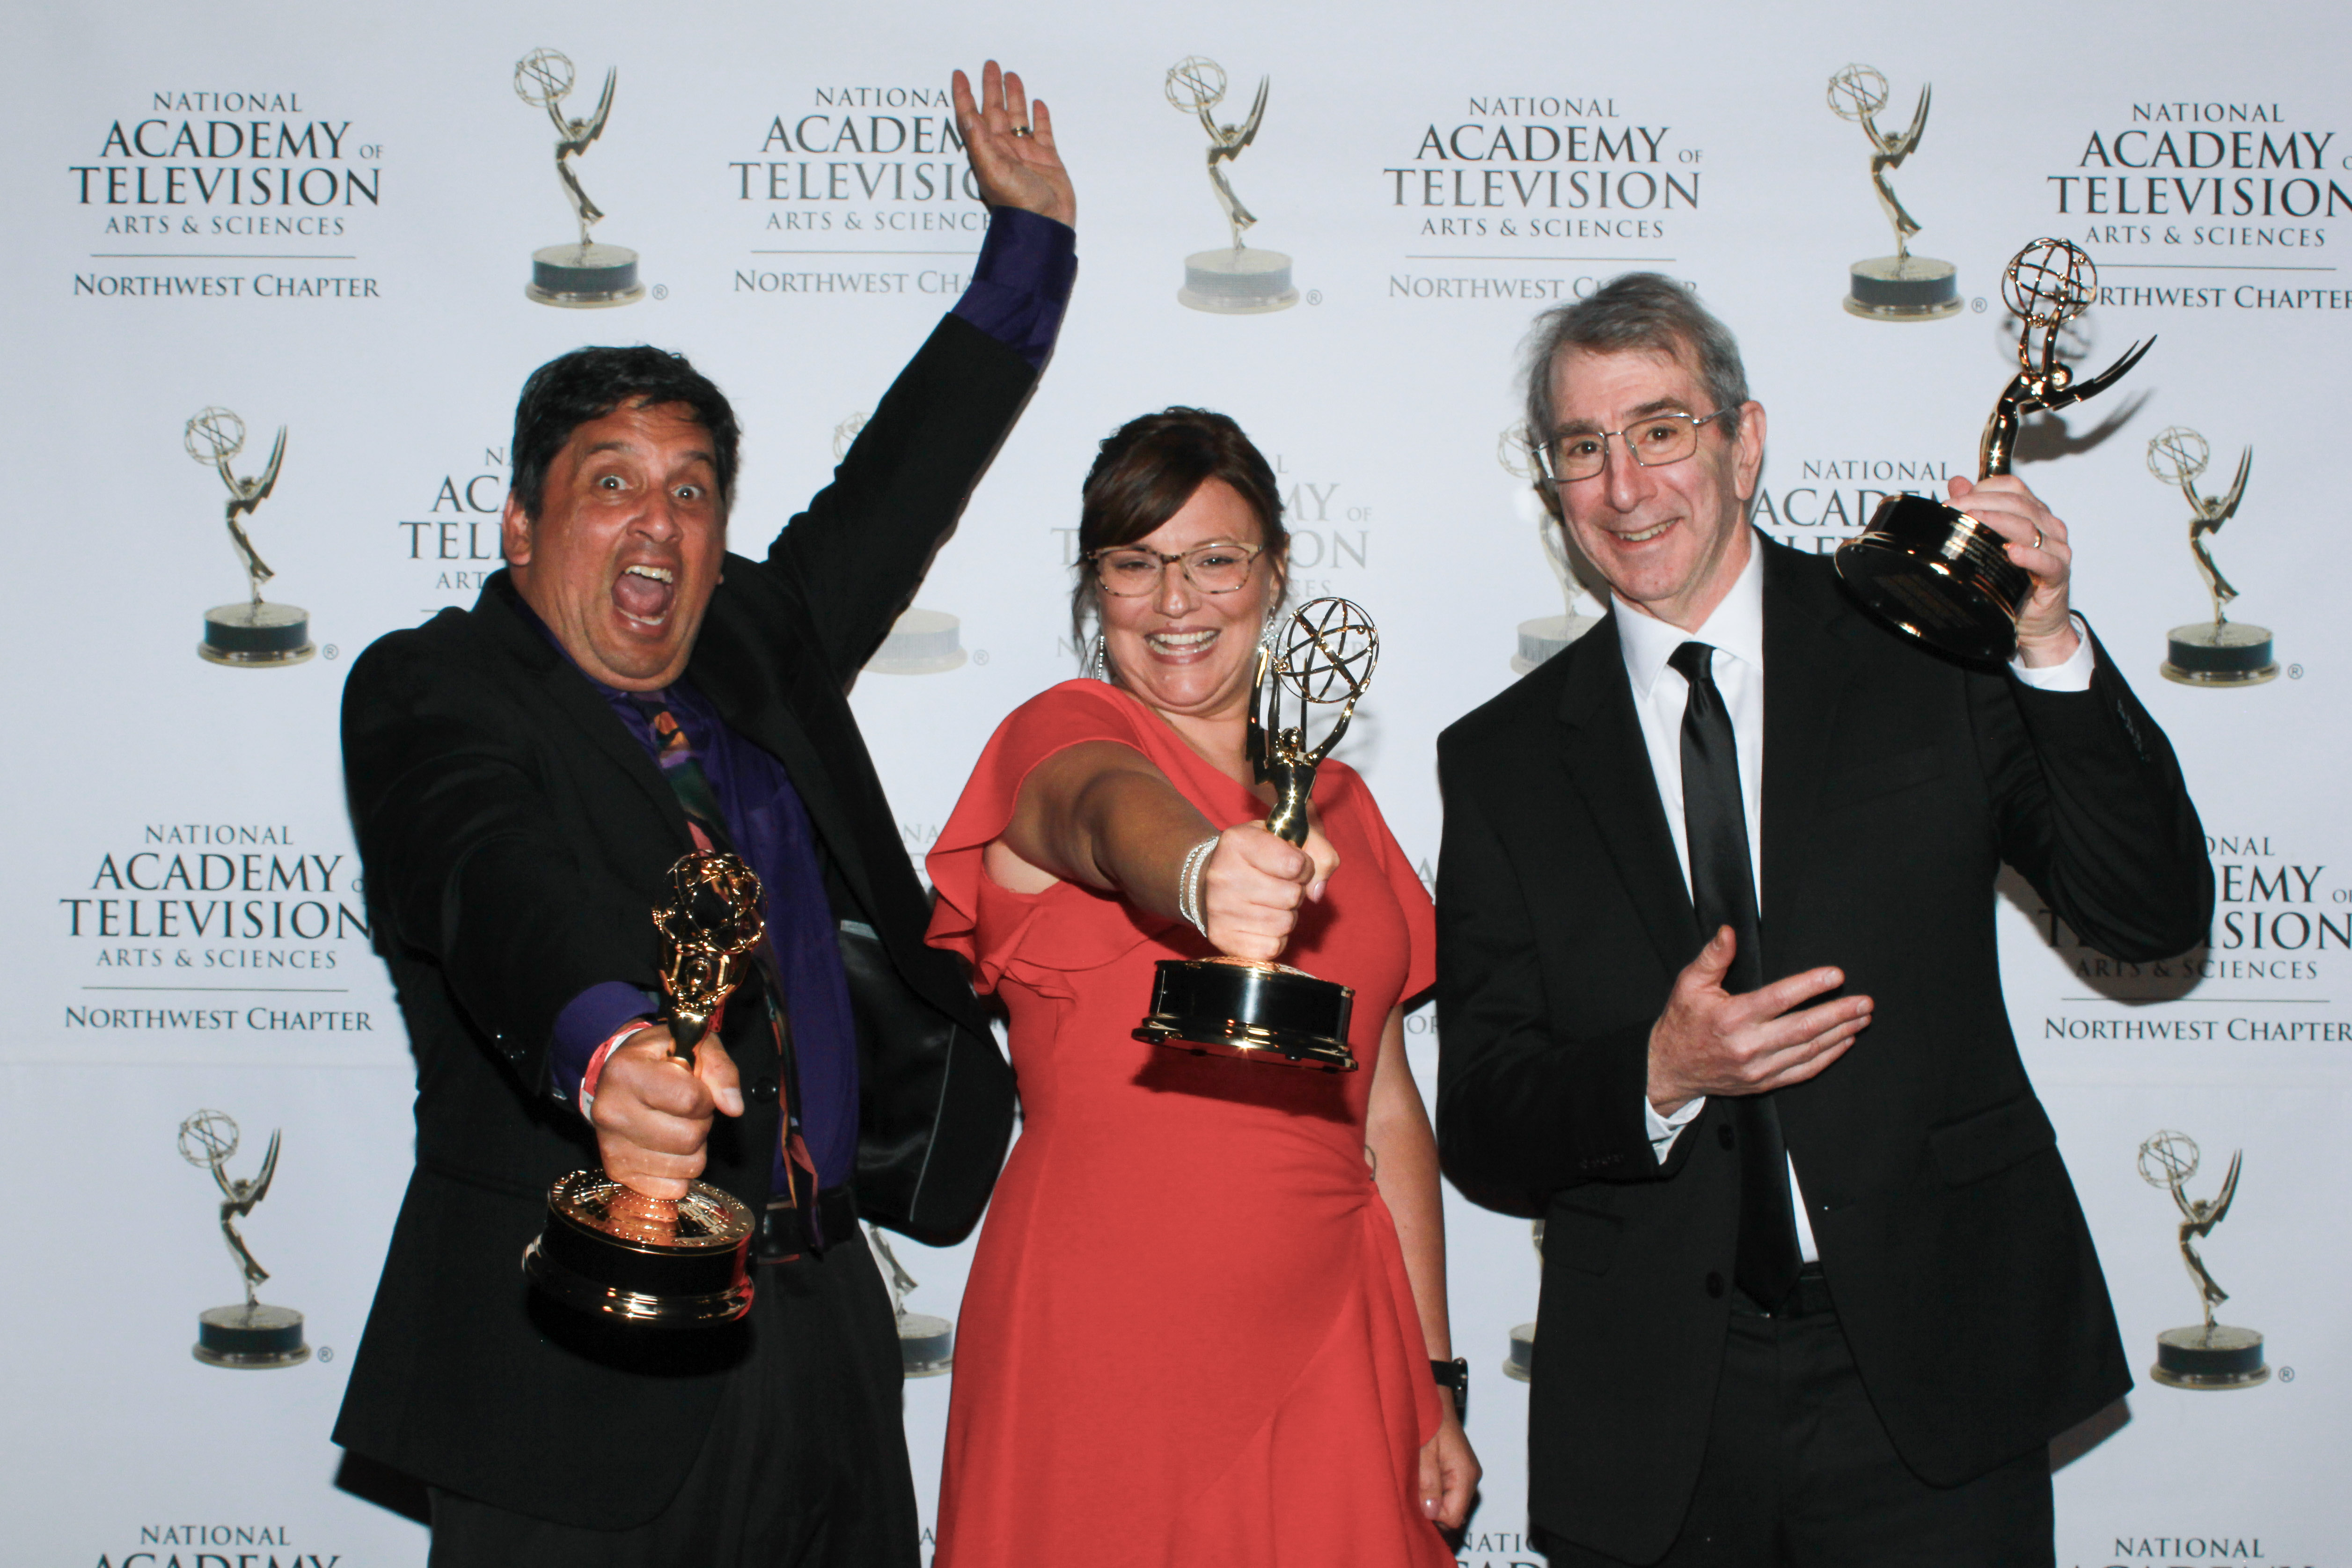 Dave Rees, Cara Podenski and Eric Chudler at the NW Emmy Award Ceremony.